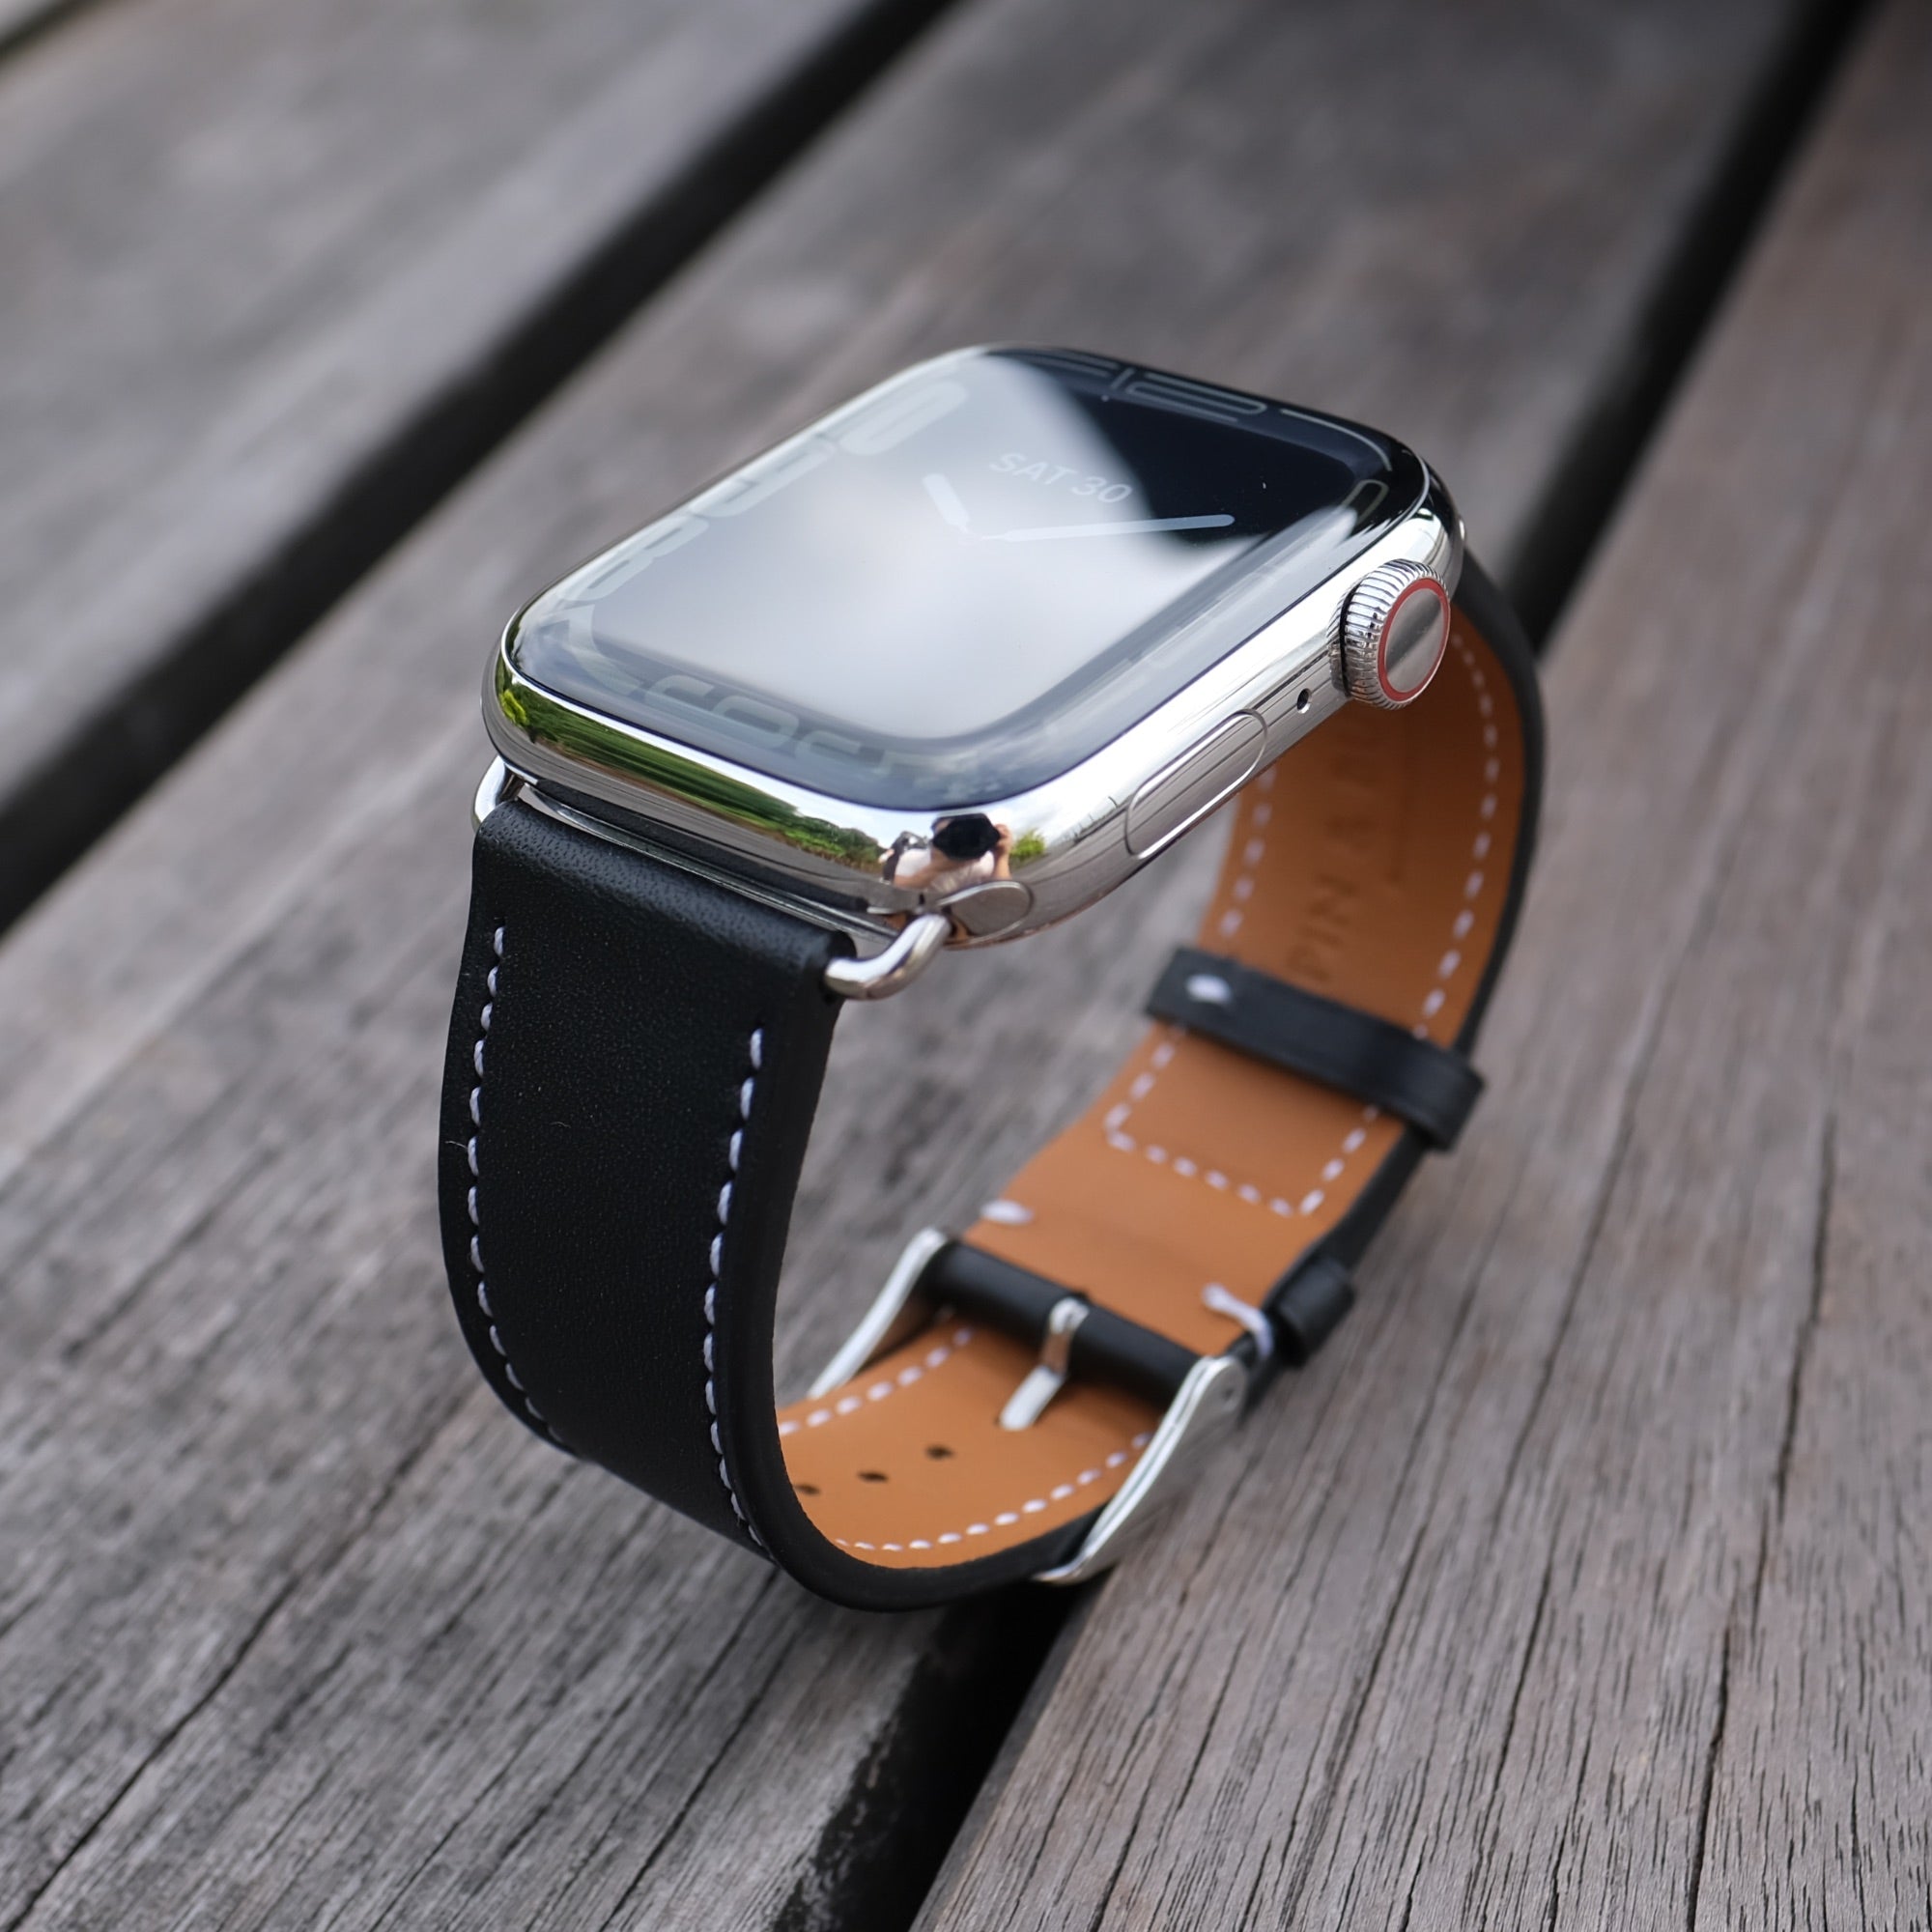 Range Leather Co Riveted Apple Watch Band Nut